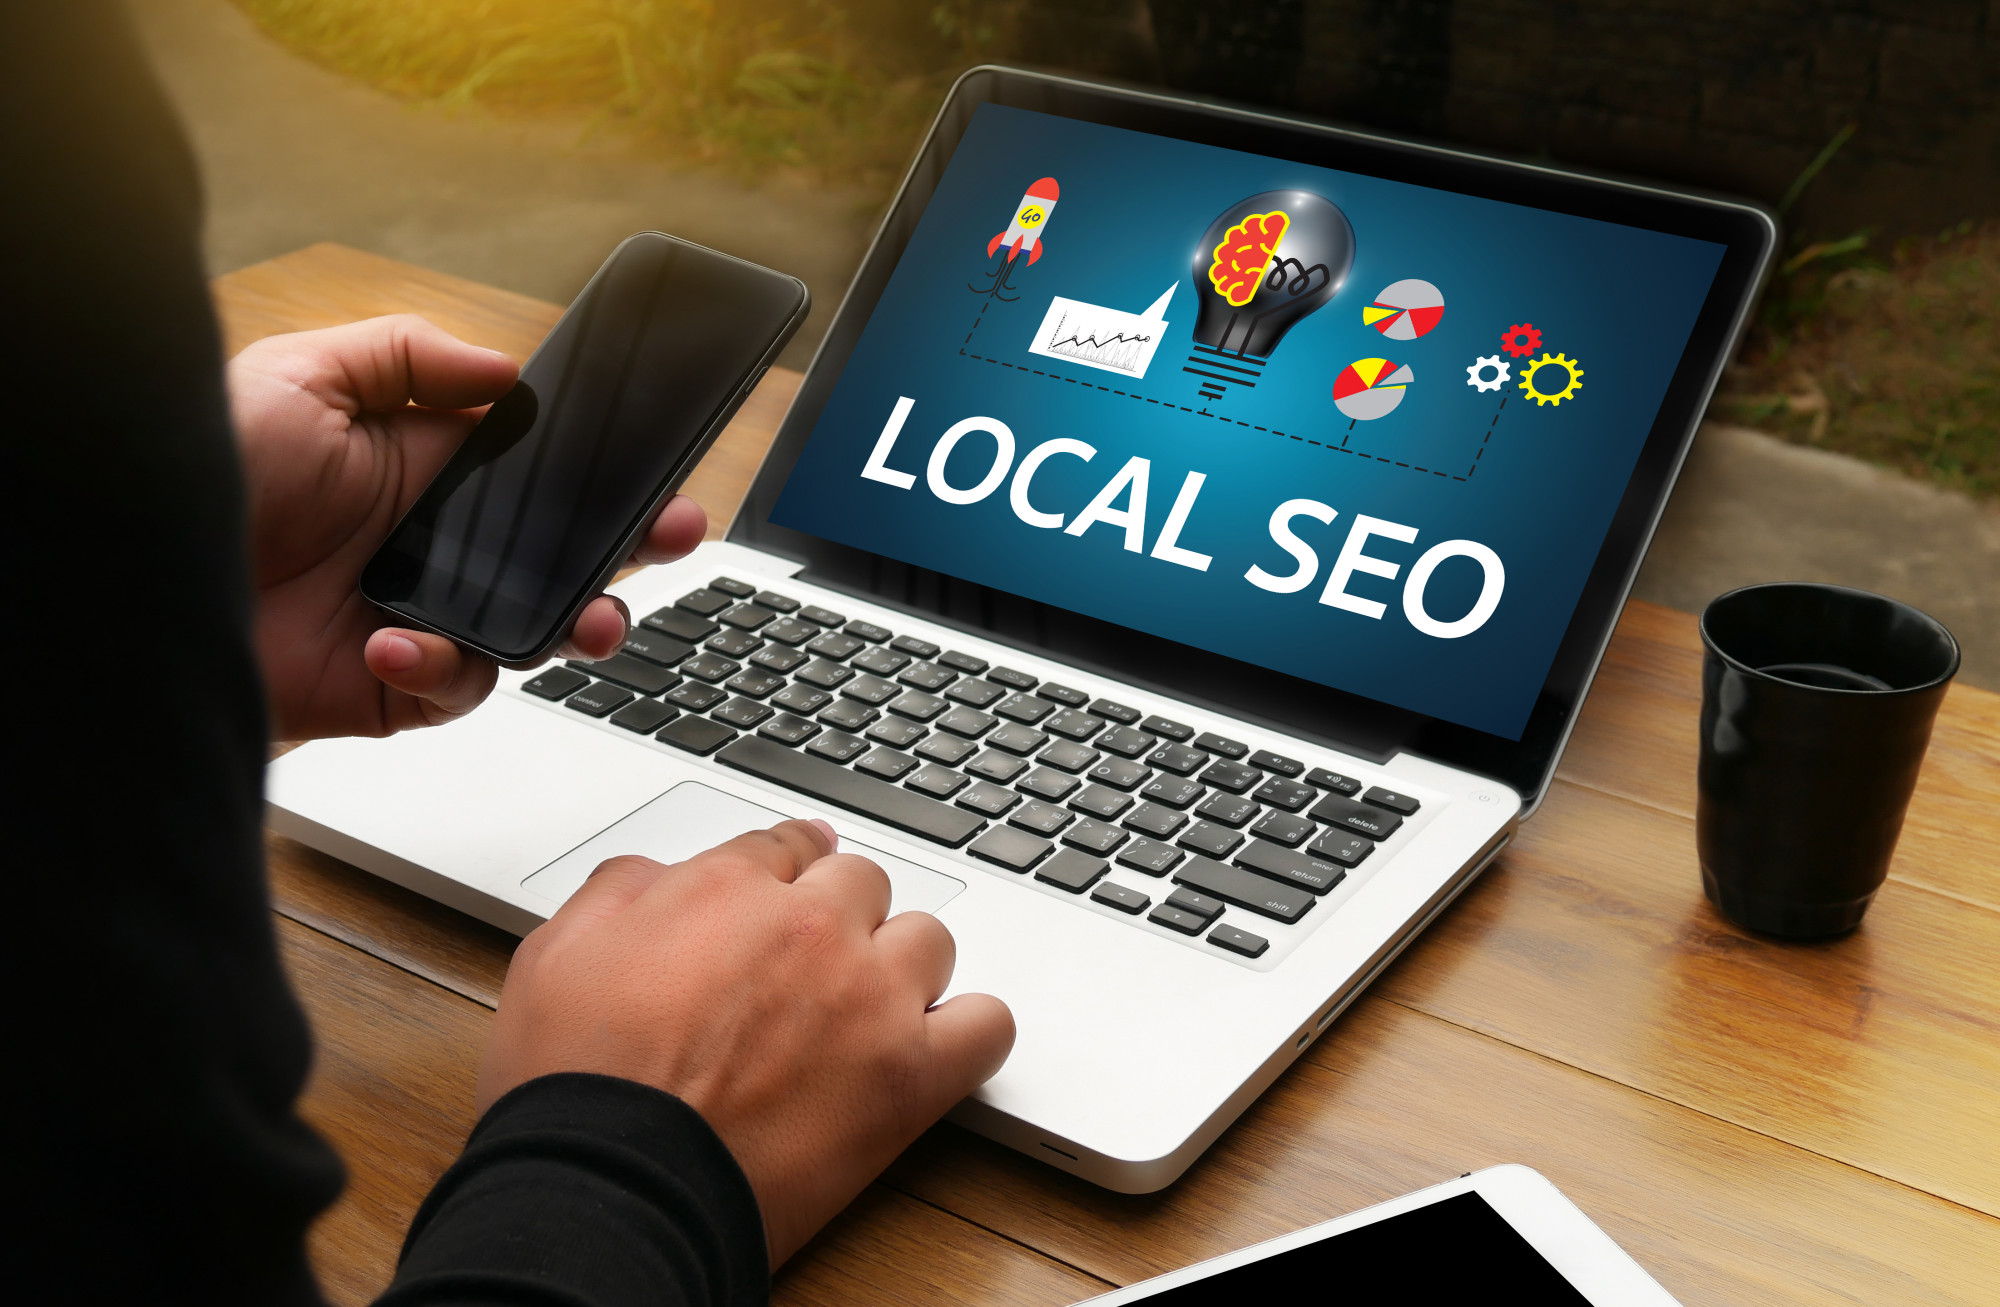 Local SEO: 5 Things To Keep In Mind